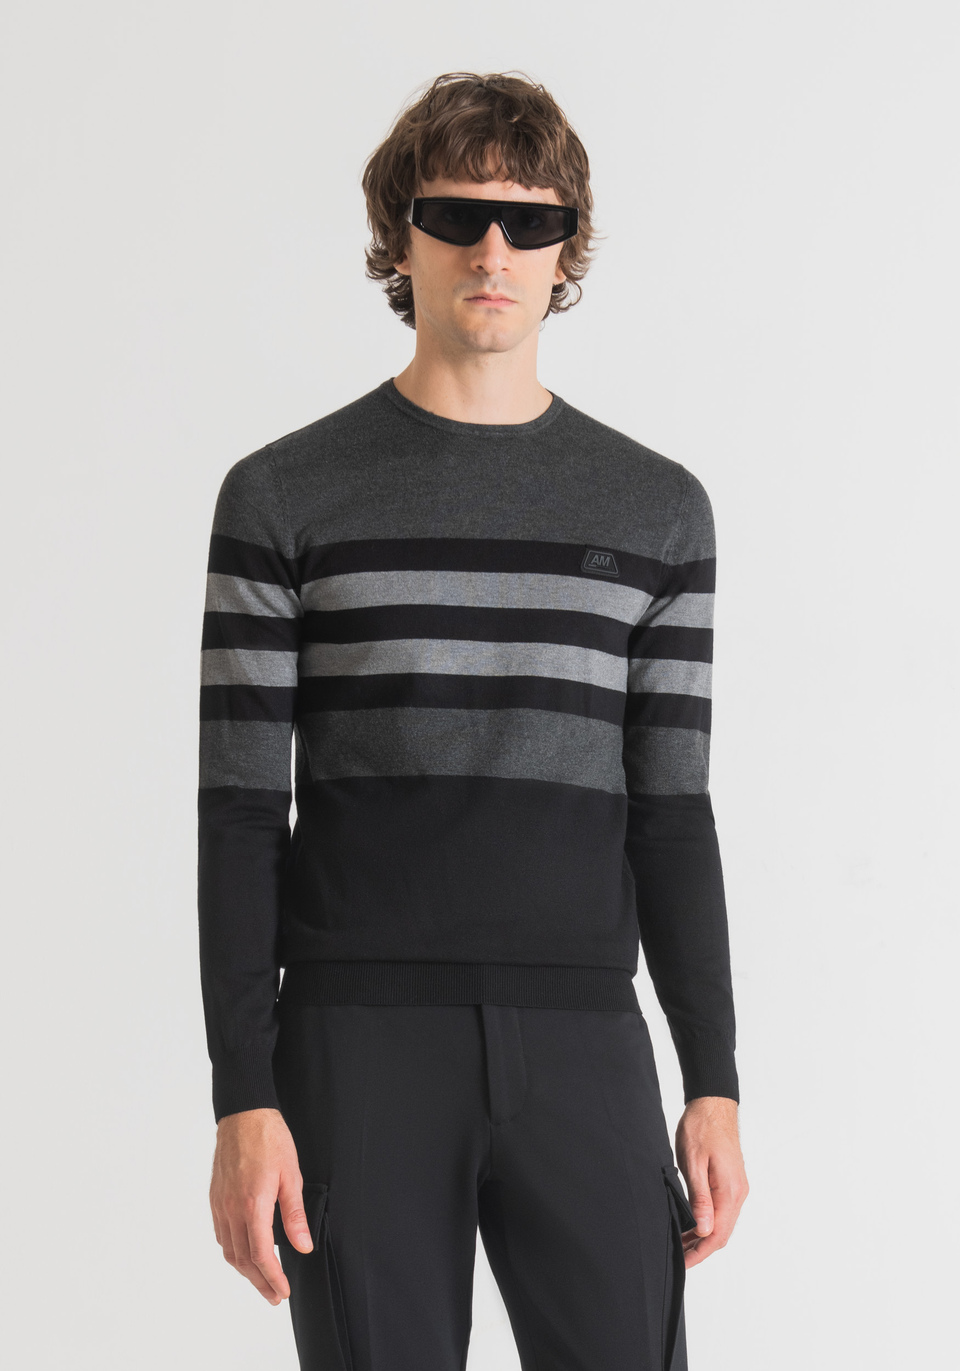 SOFT YARN SLIM FIT SWEATER WITH JACQUARD BANDS - Antony Morato Online Shop